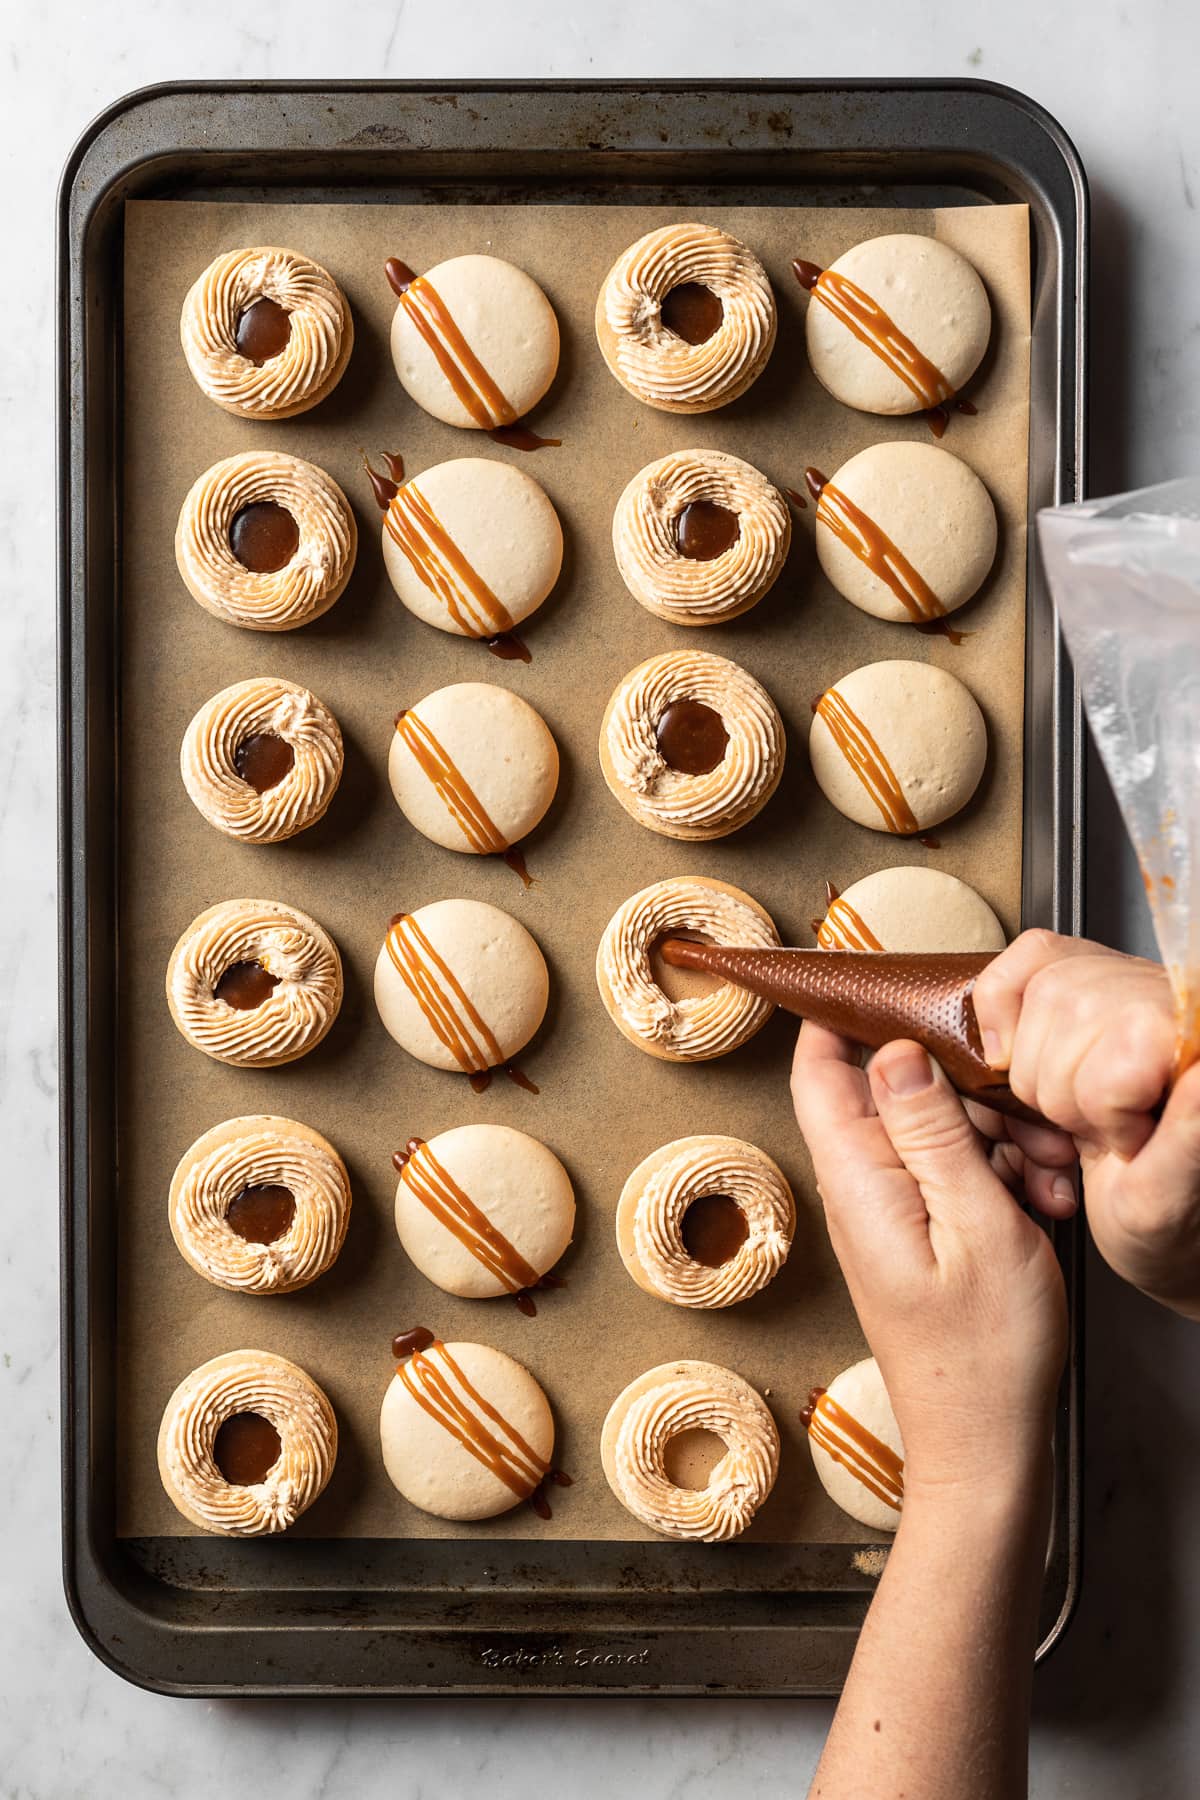 Process photo showing a parchment lined baking sheet full of macaron shells. Half are filled with buttercream and caramel sauce, and the other half have a decorative caramel decoration on top. A pair of hands holding a caramel filled piping bag reach into the frame.